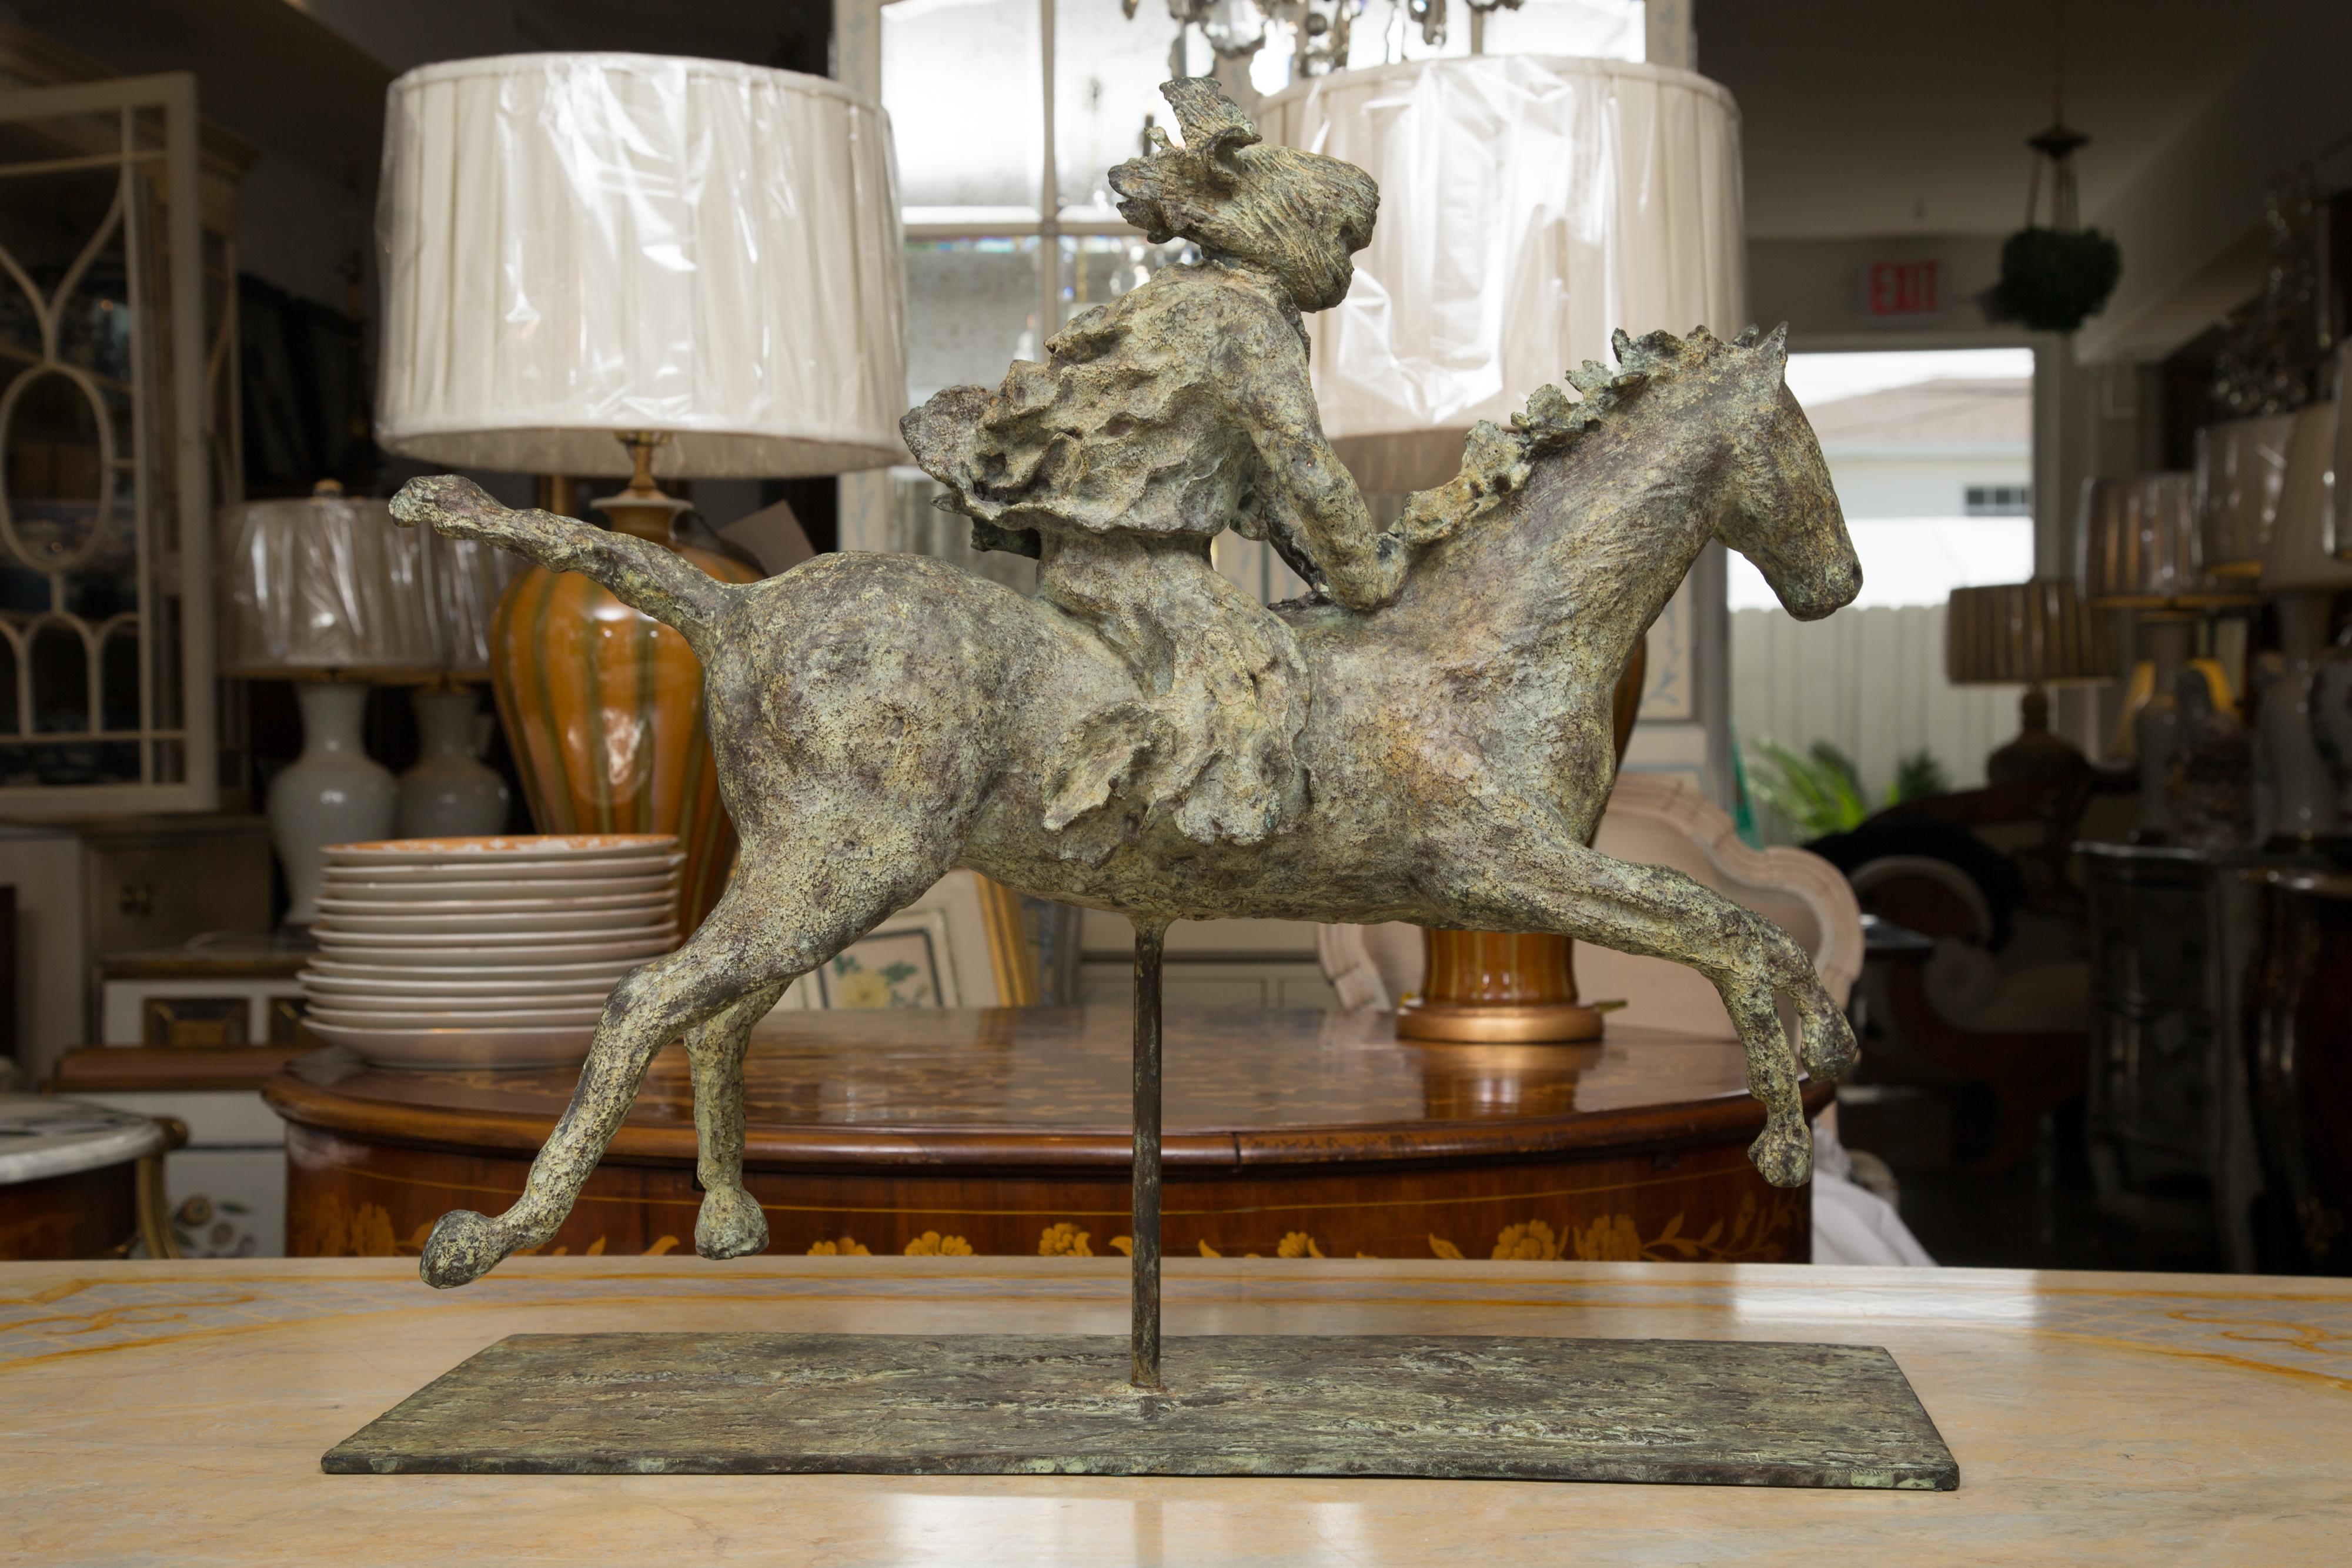 Turaeg Riding Horse on Metal Stand by Sculptor Lara 12